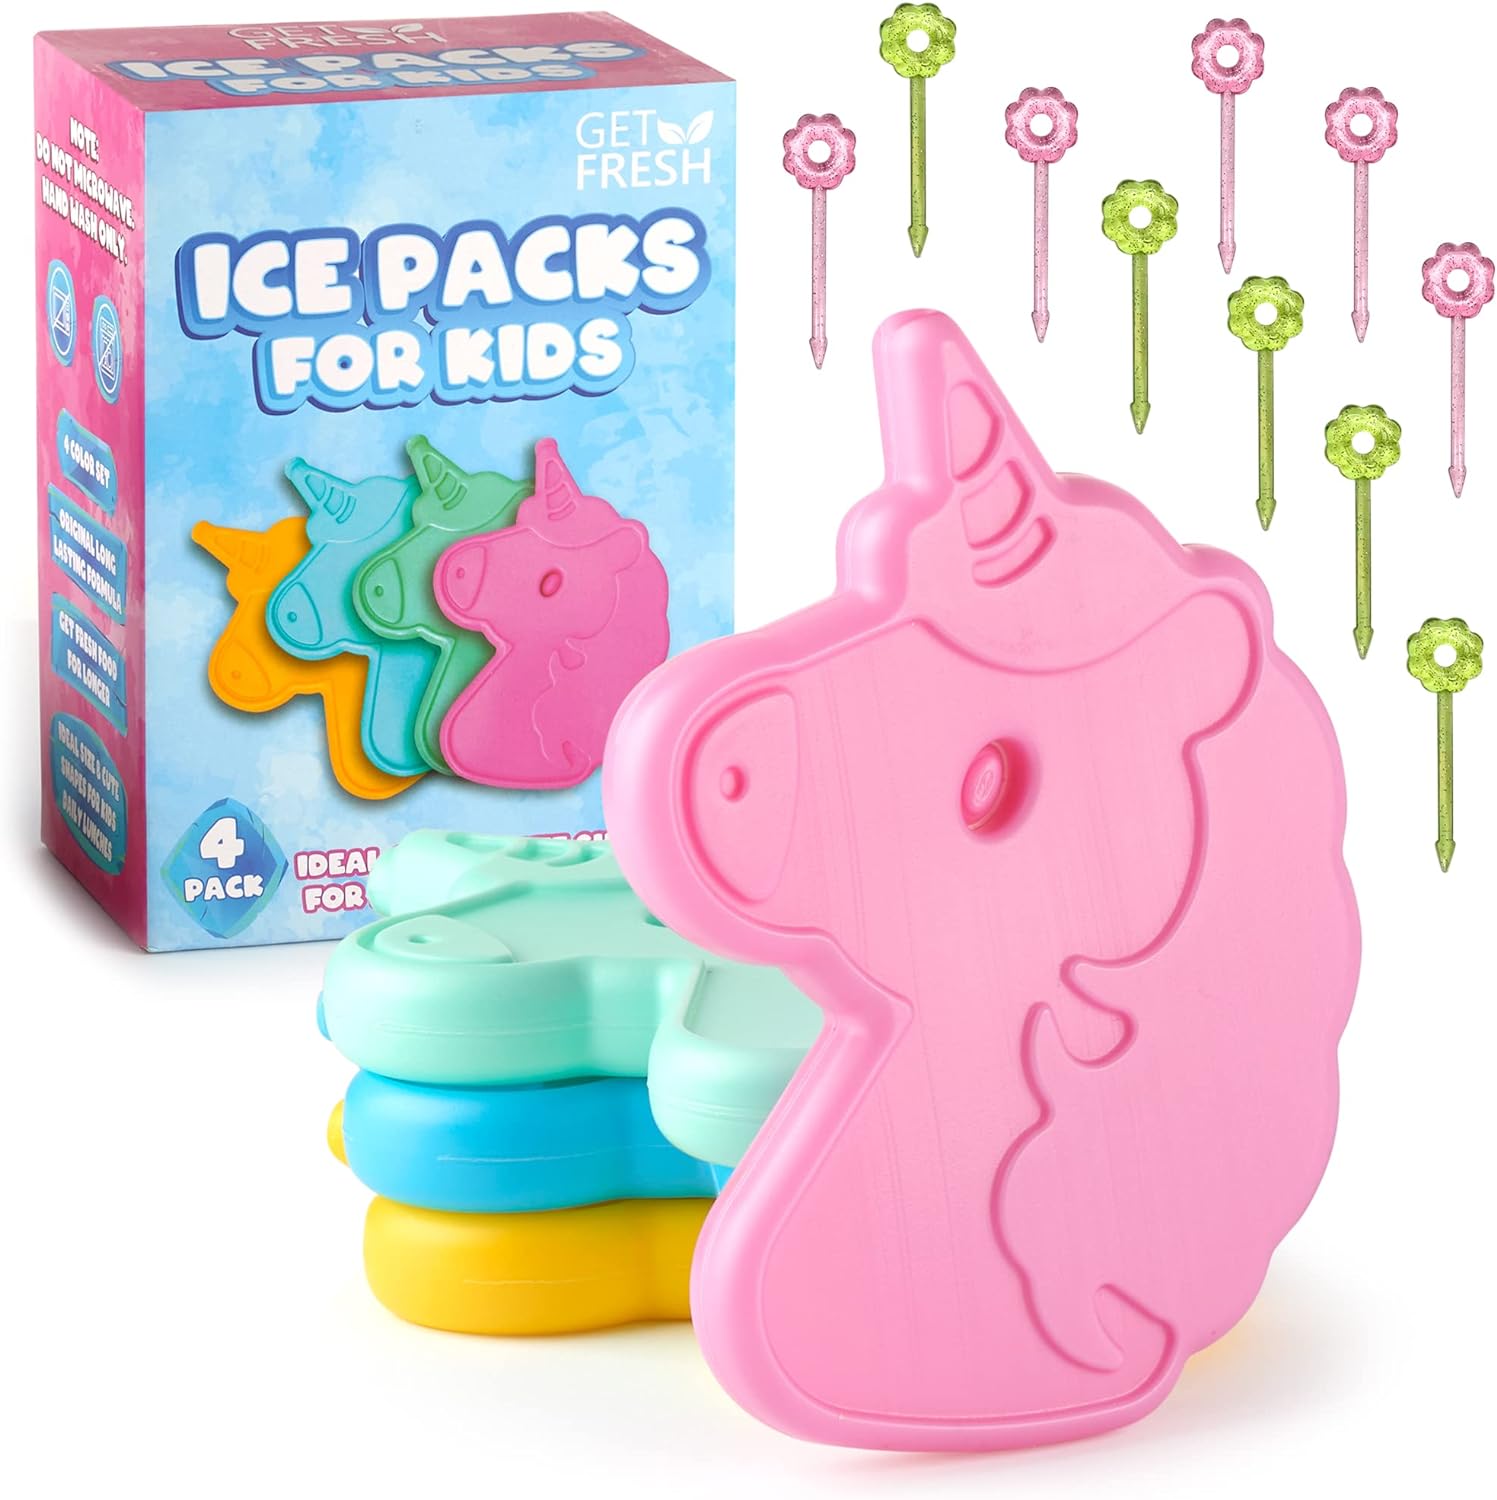 4-Pack Unicorn Small Freezer Blocks for Cool Bags and Lunch Boxes